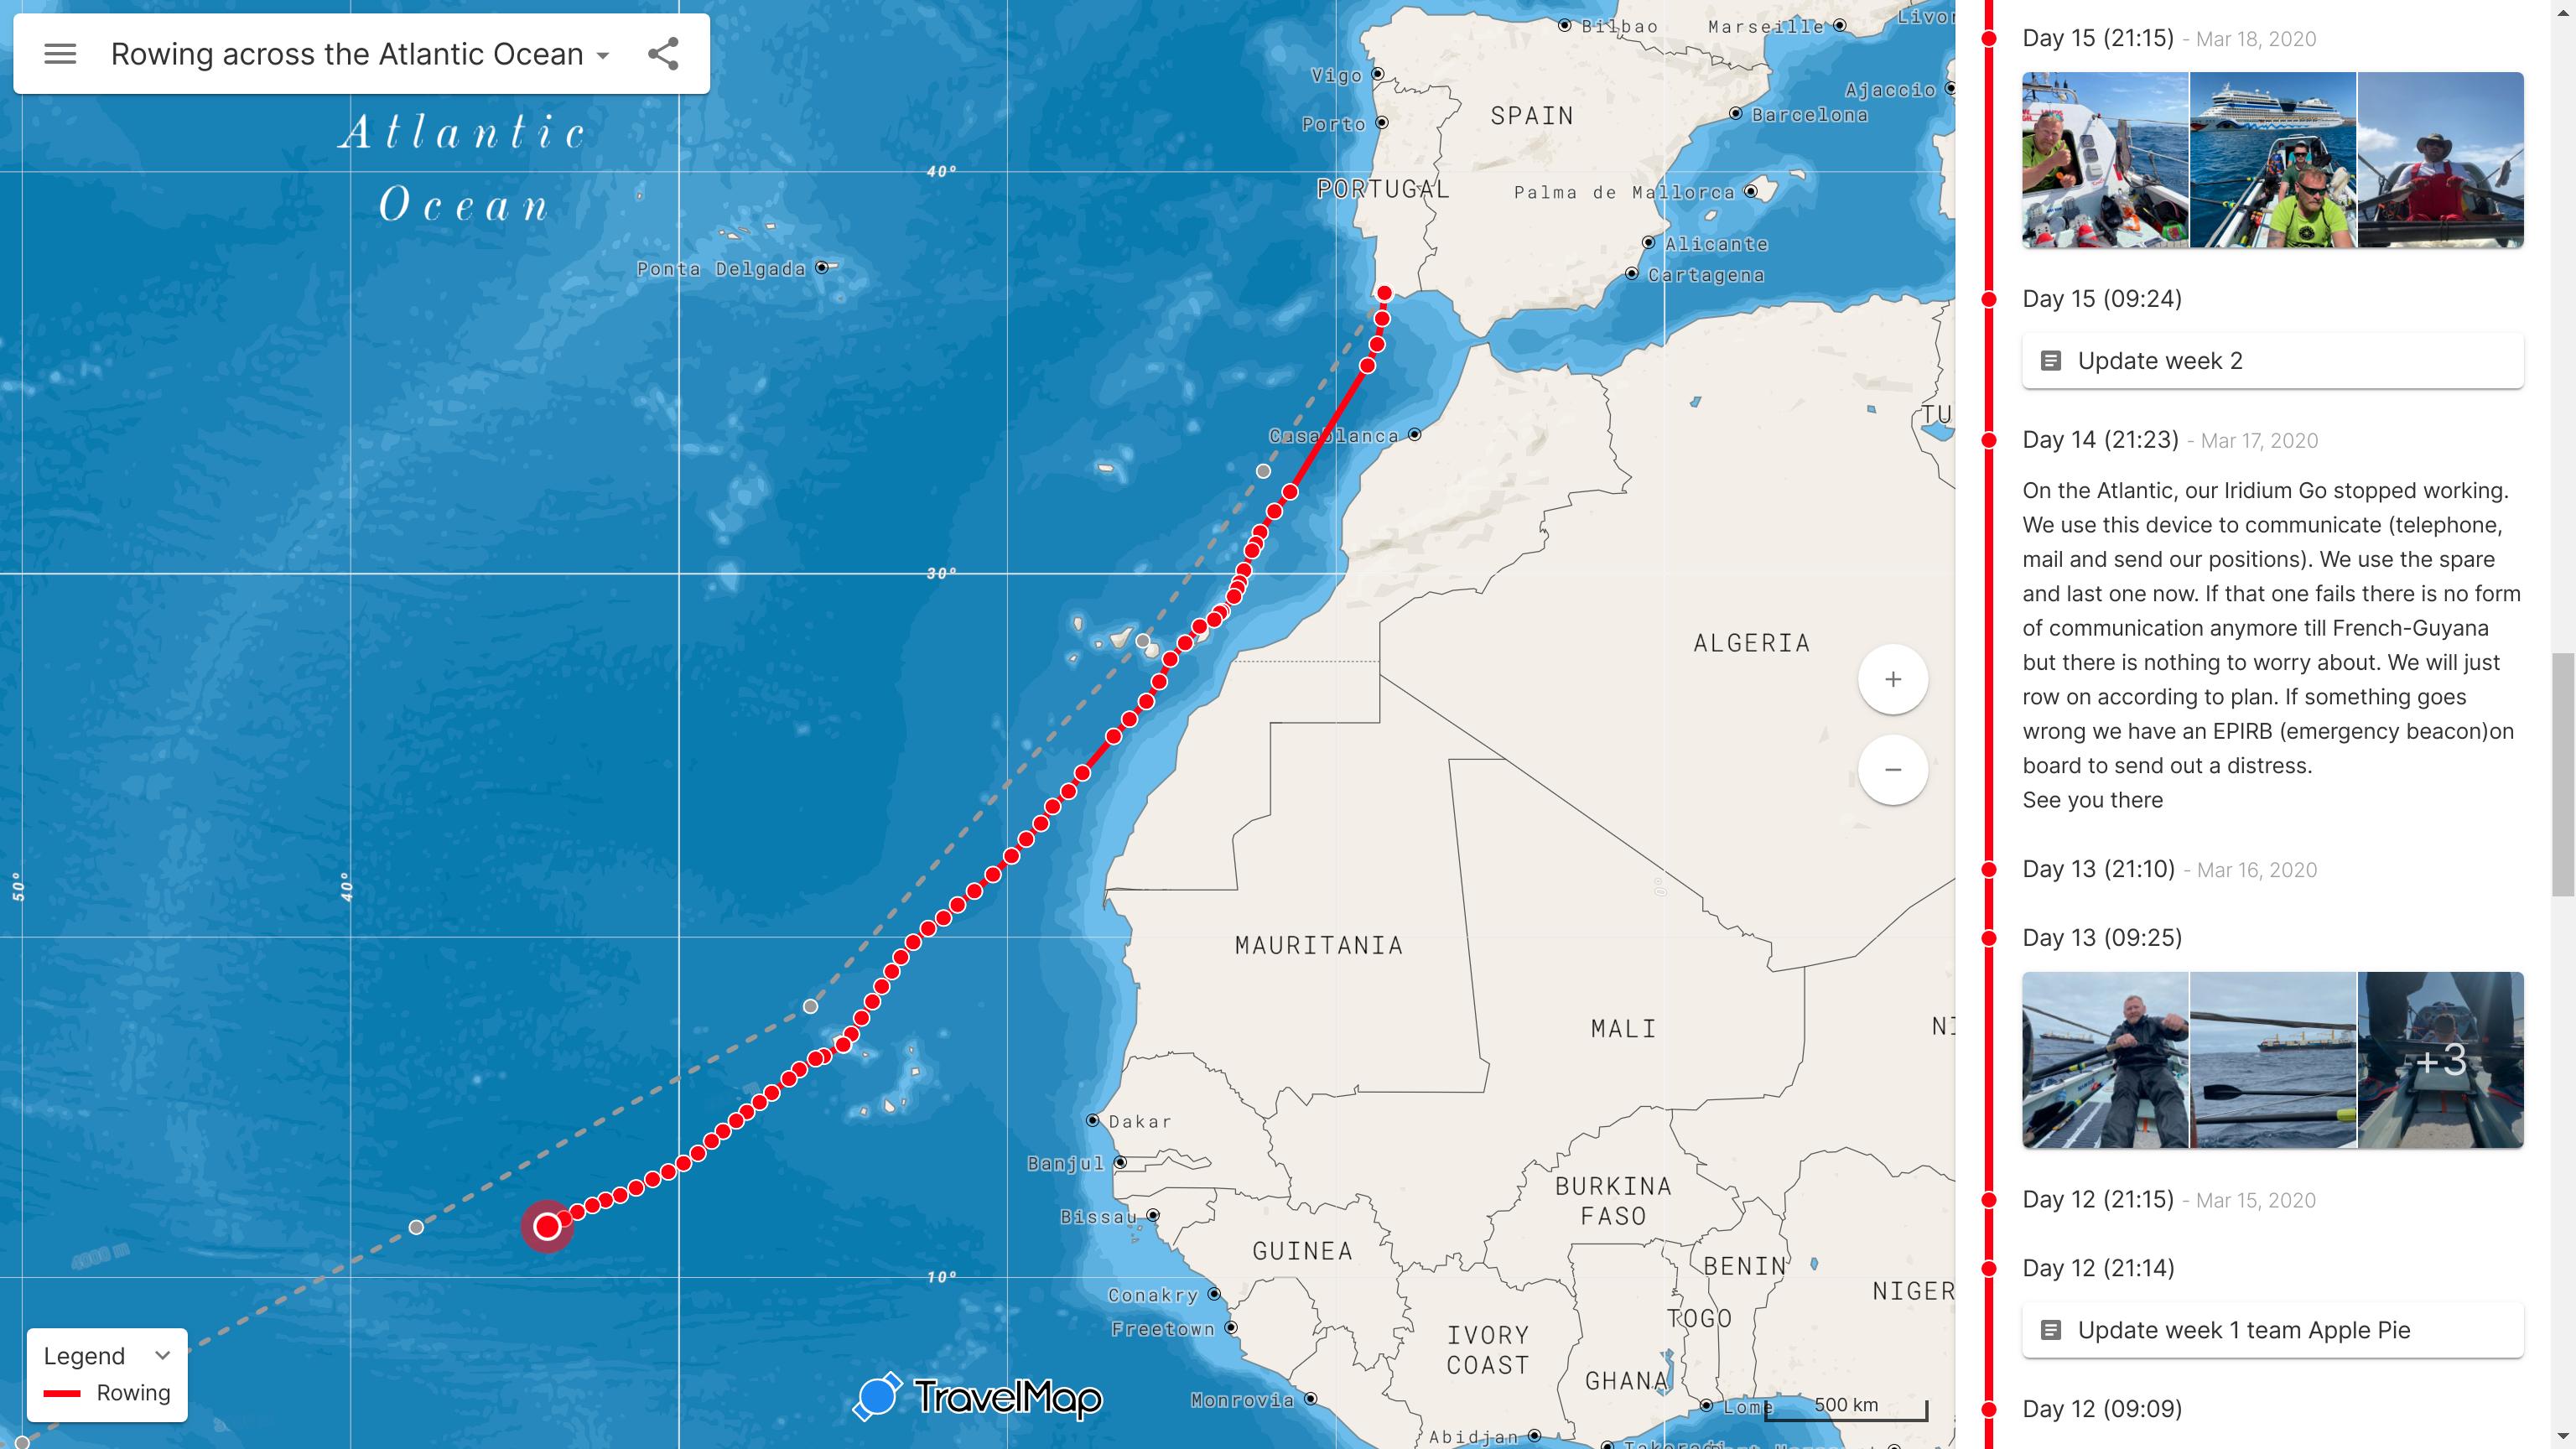 Real-time updates on an interactive map across the ocean